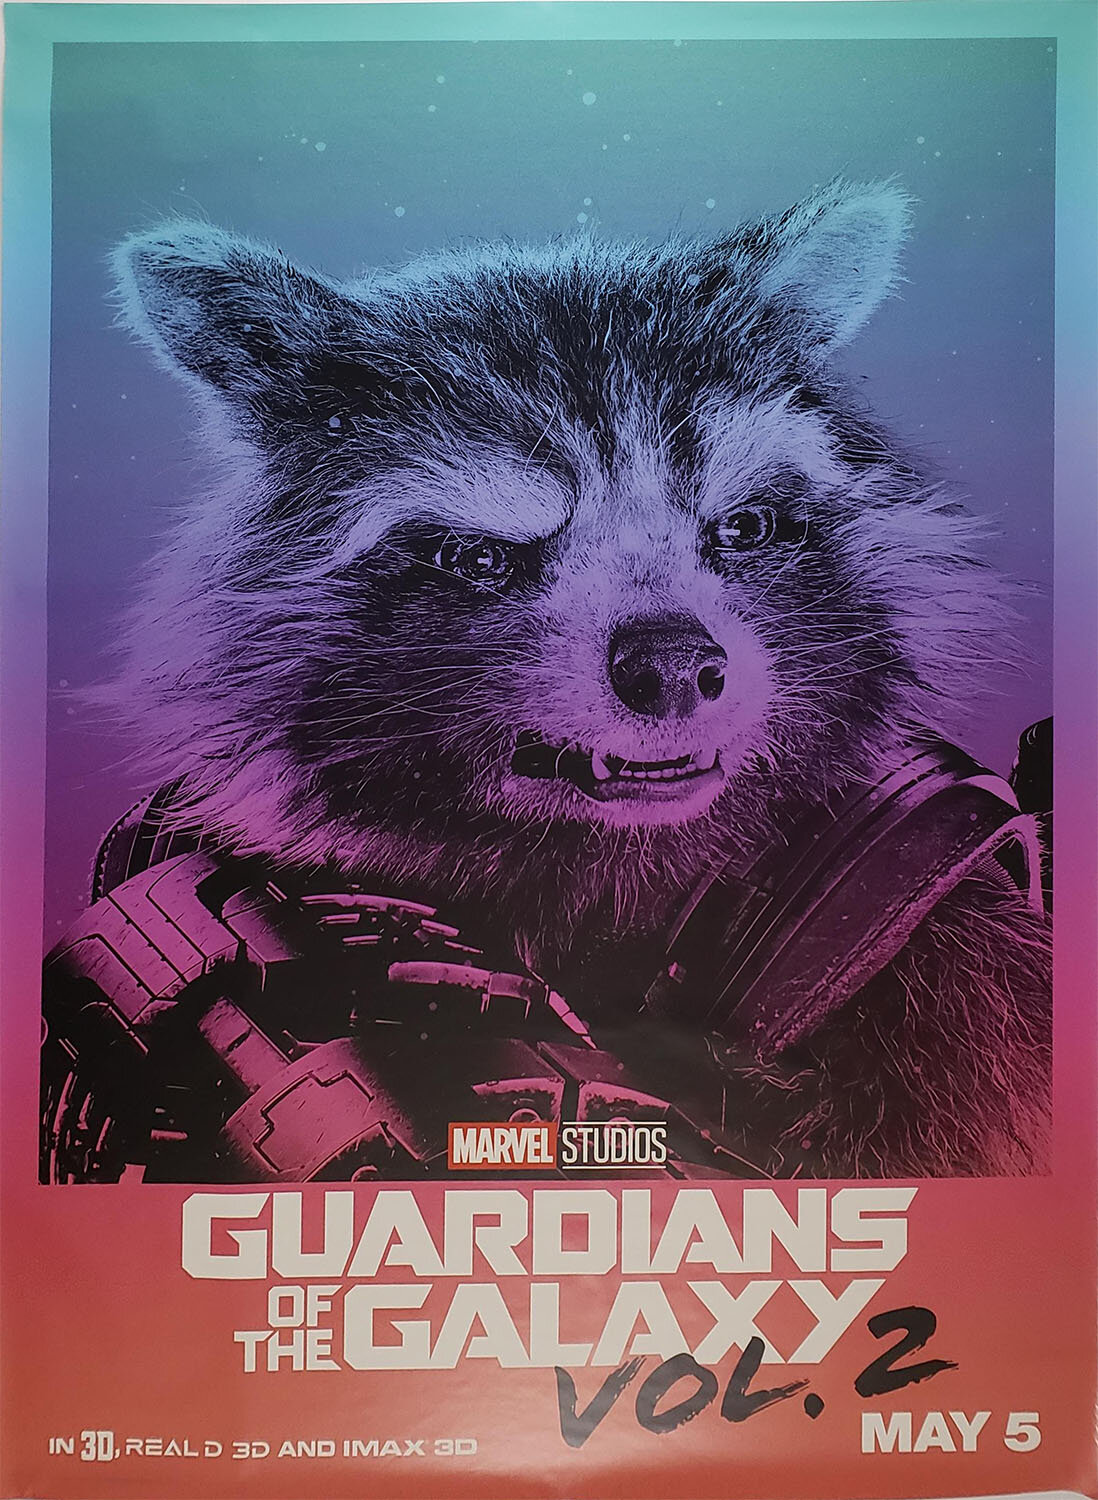 Rocket-racoon-Guardians-of-the-galaxy-Wilding-poster